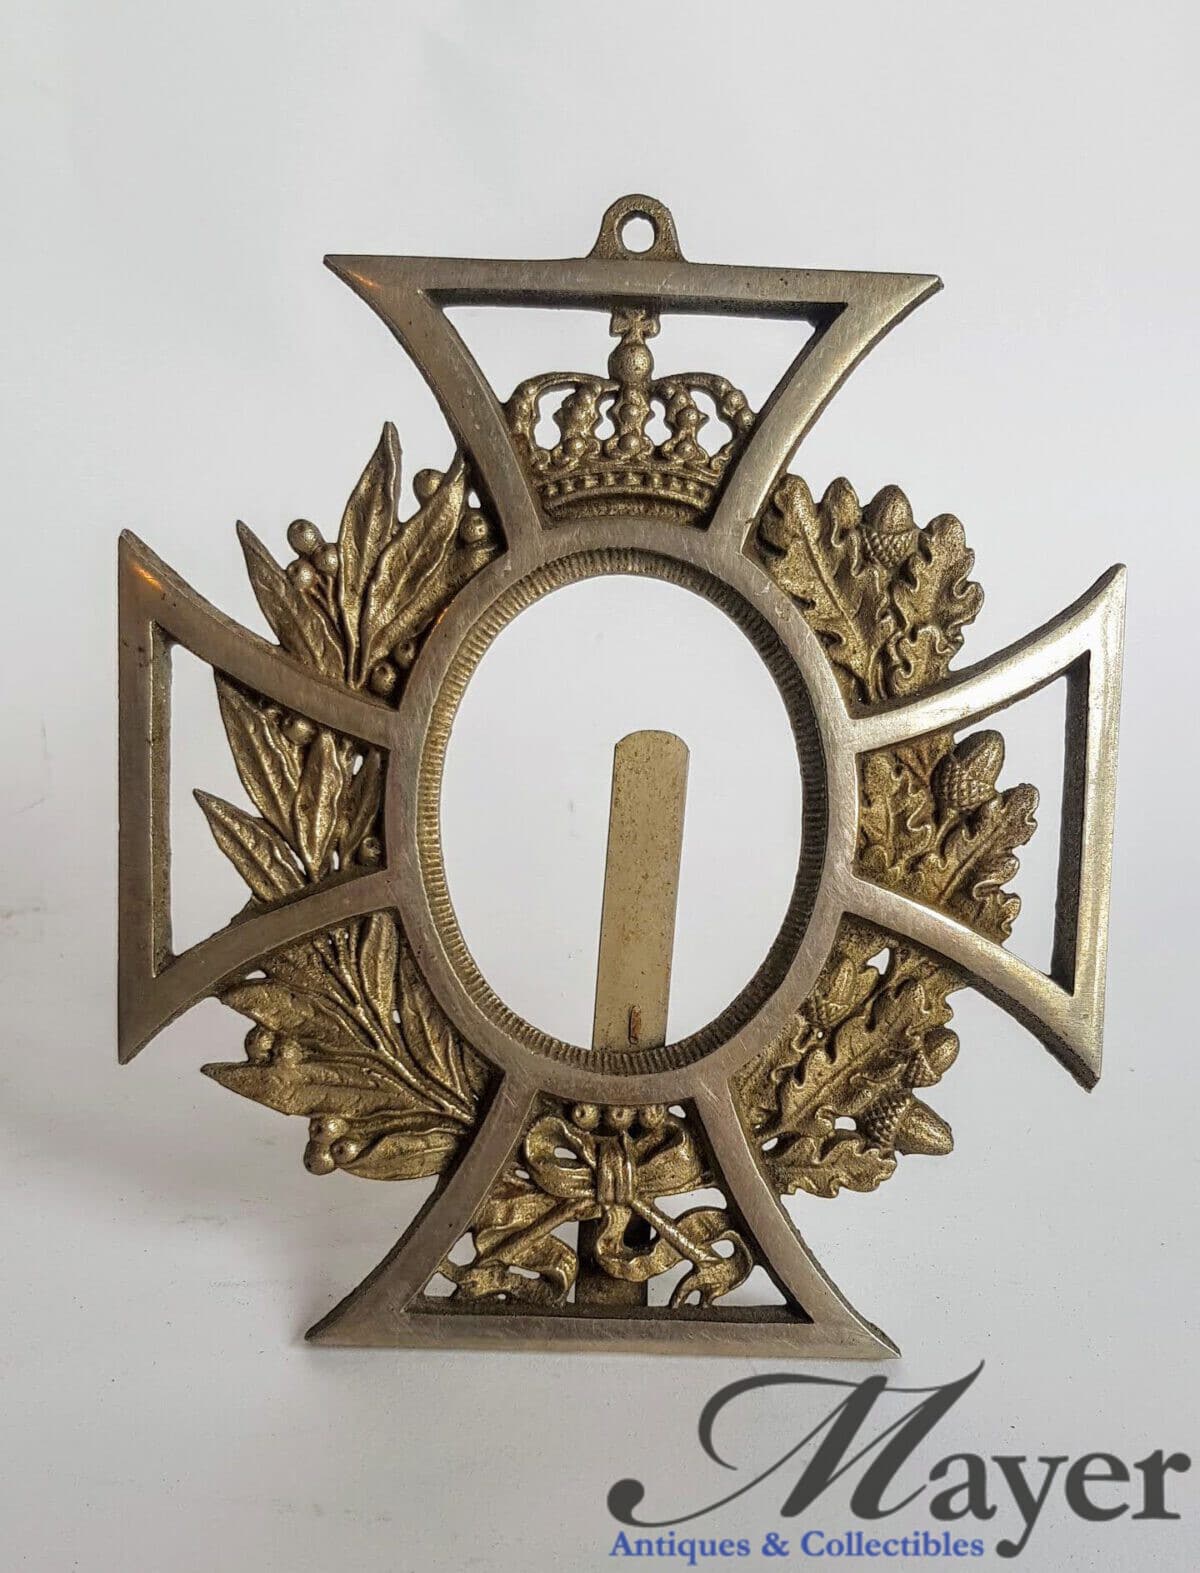 German Iron Cross picture frame for commemorating a fallen soldier